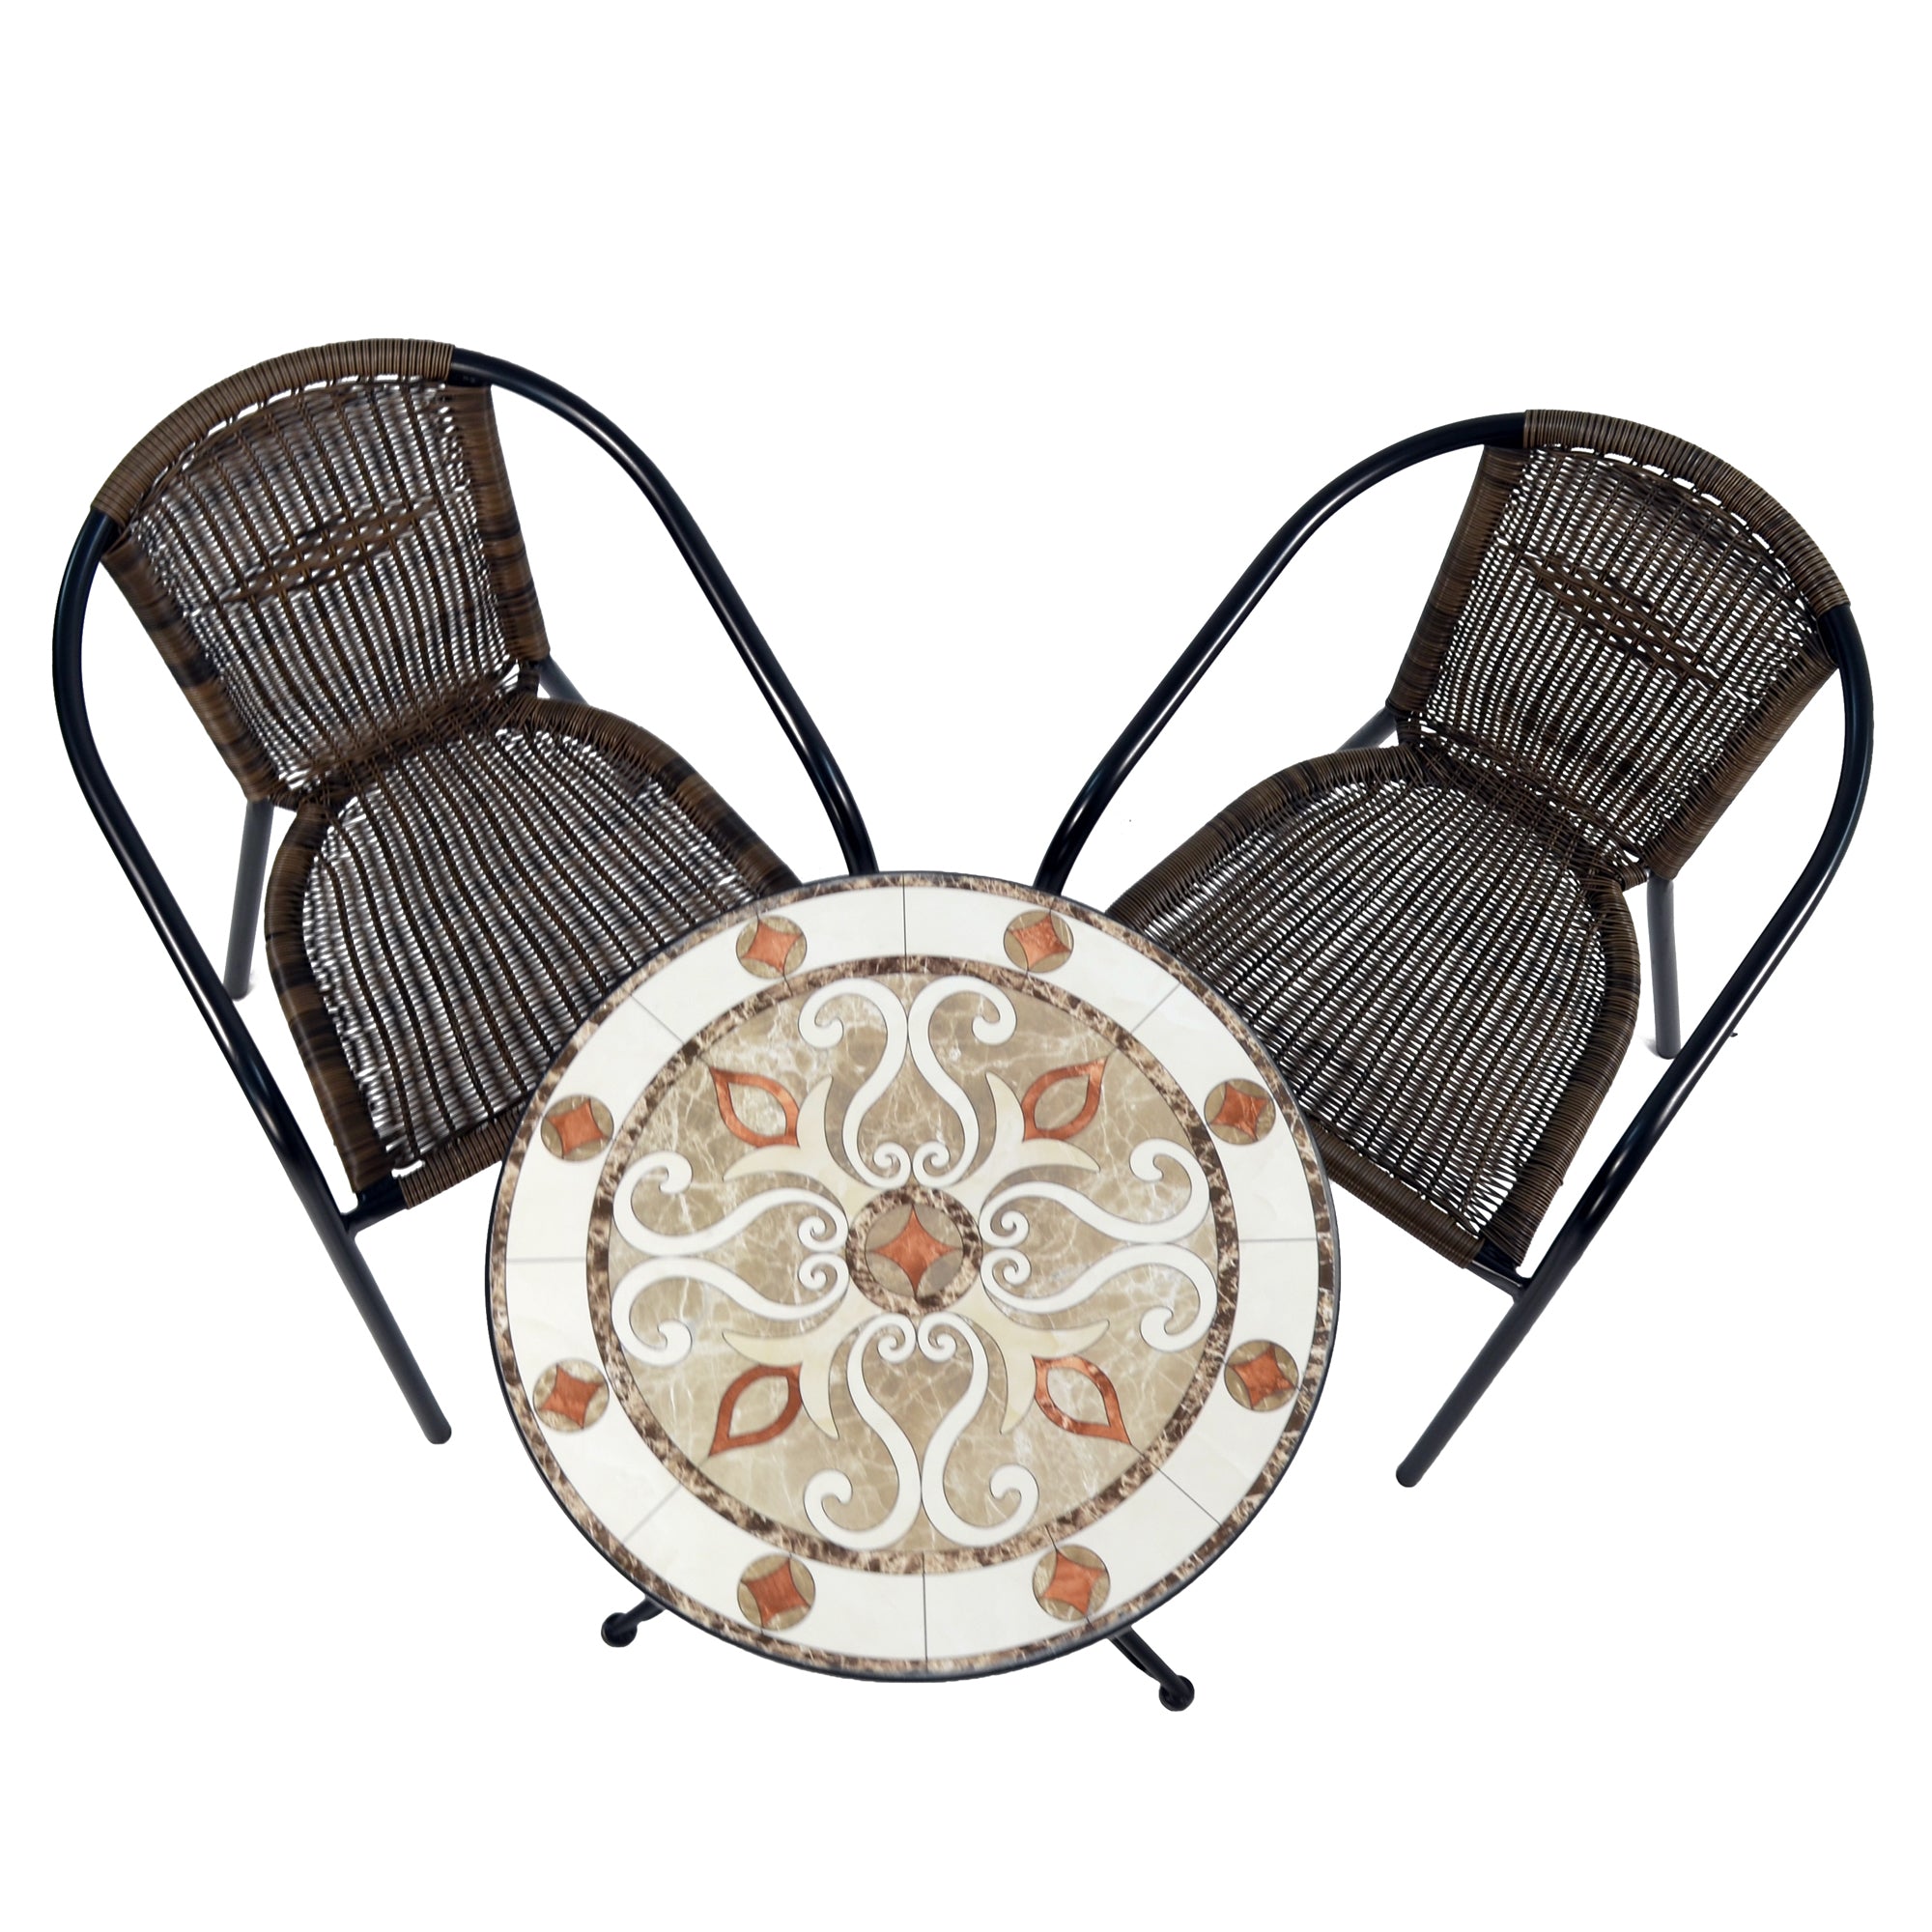 Summer Terrace Estoril Bistro Garden Table Set with 2 San Remo Chairs Dining Sets Summer Terrace   